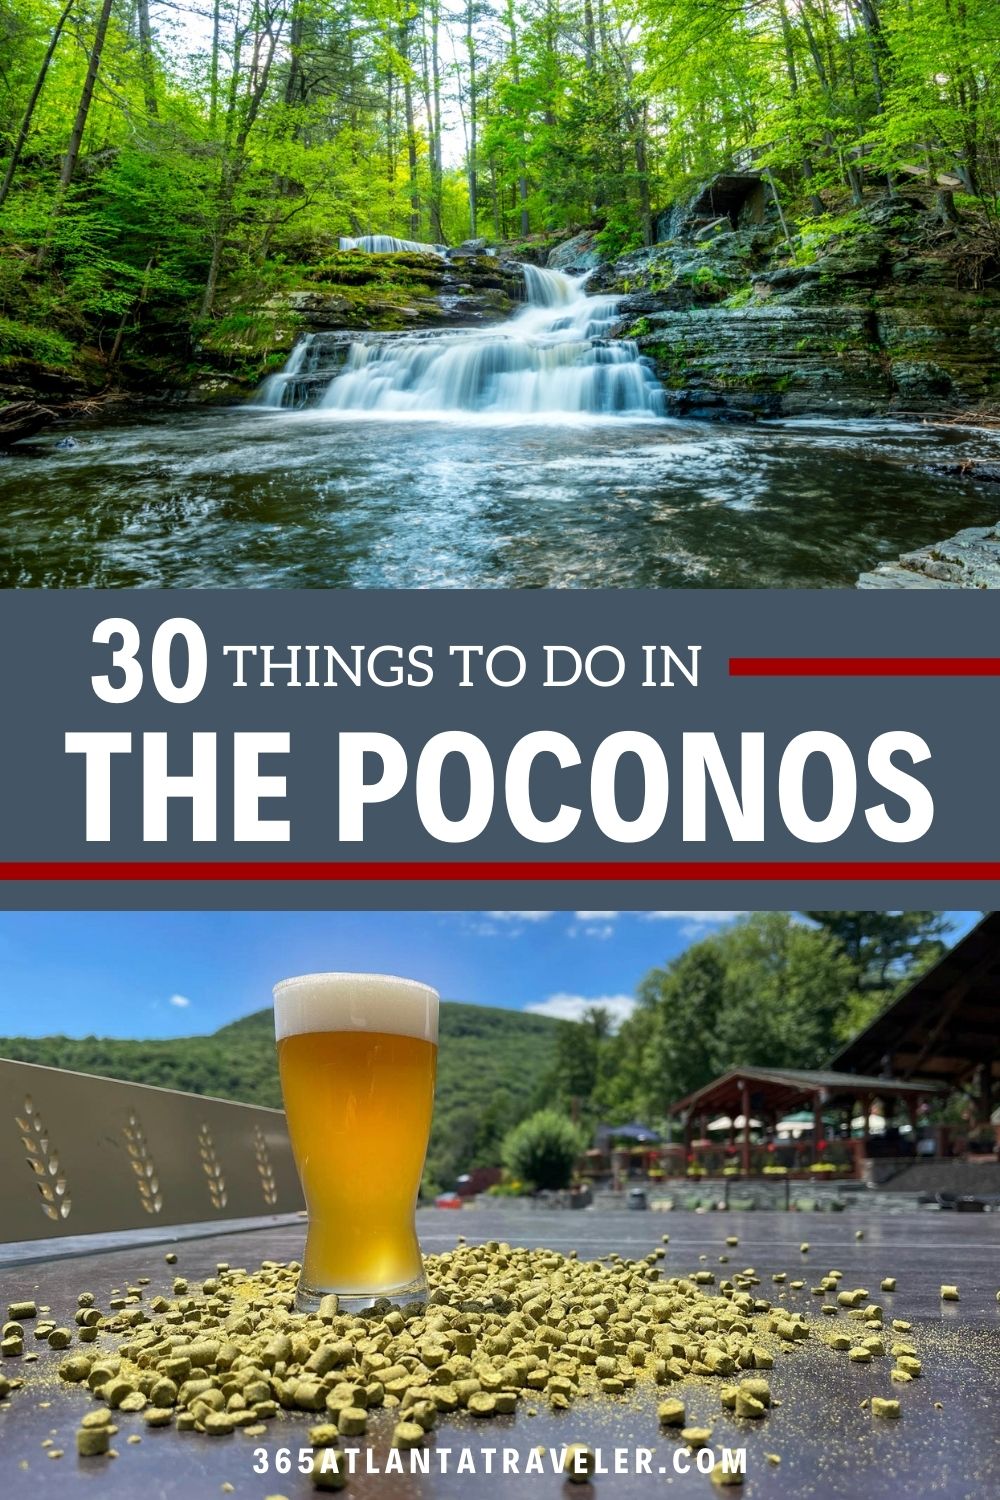 30 THINGS TO DO IN THE POCONOS YOU CAN'T MISS